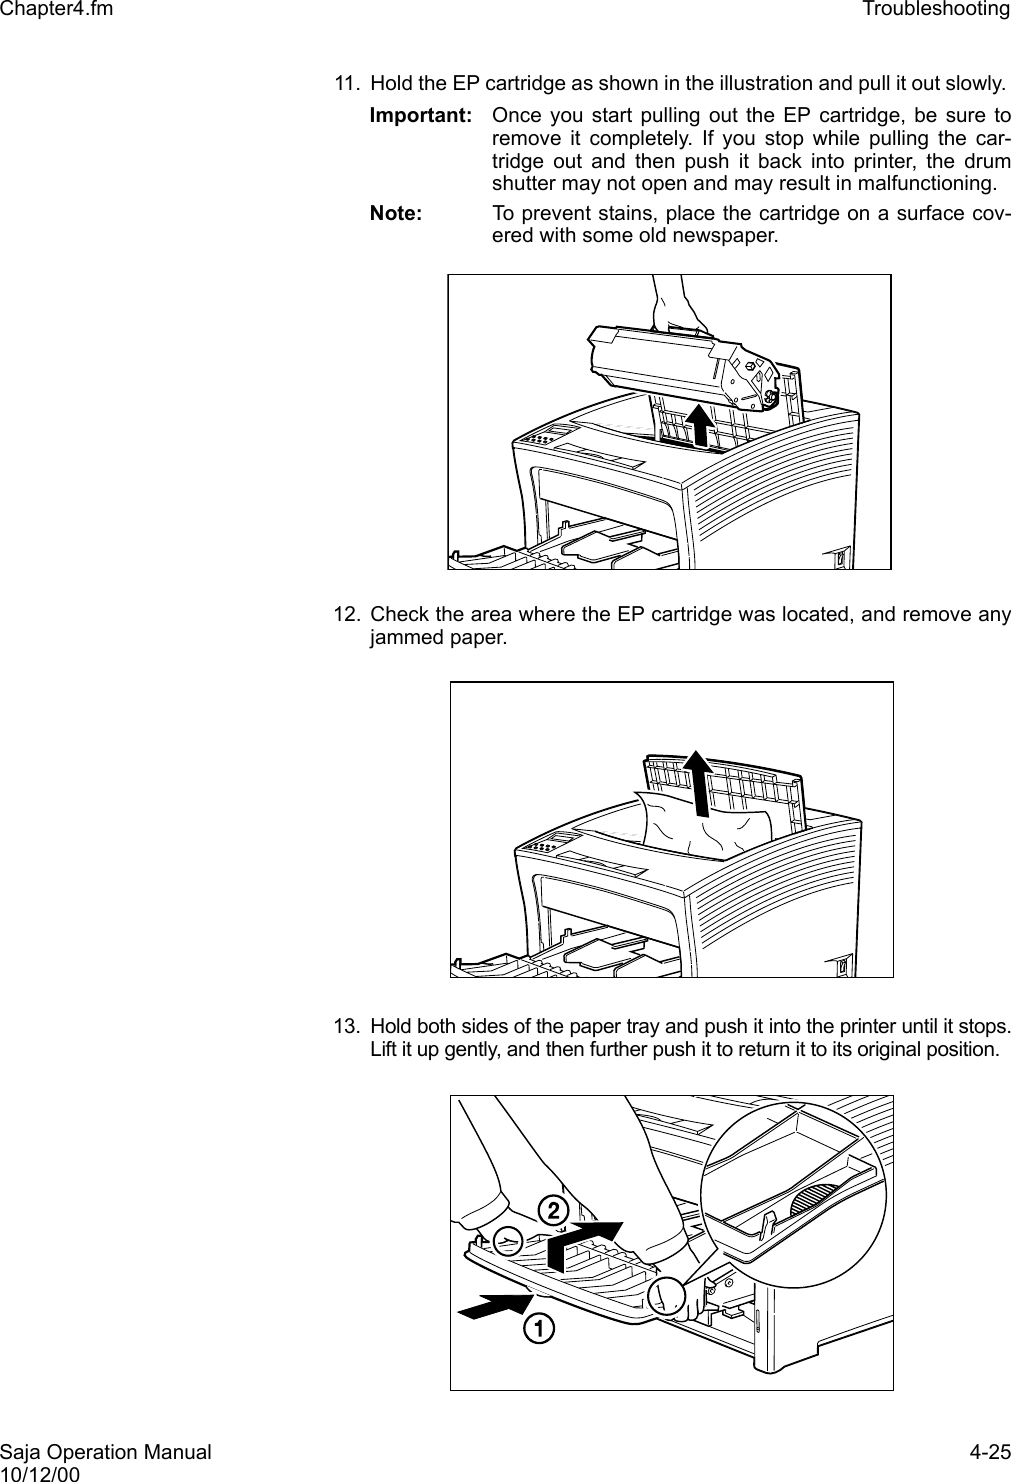 Saja Operation Manual 4-2510/12/00Chapter4.fm Troubleshooting 11. Hold the EP cartridge as shown in the illustration and pull it out slowly. Important: Once you start pulling out the EP cartridge, be sure toremove it completely. If you stop while pulling the car-tridge out and then push it back into printer, the drumshutter may not open and may result in malfunctioning.Note:  To prevent stains, place the cartridge on a surface cov-ered with some old newspaper. 12. Check the area where the EP cartridge was located, and remove anyjammed paper. 13. Hold both sides of the paper tray and push it into the printer until it stops.Lift it up gently, and then further push it to return it to its original position.